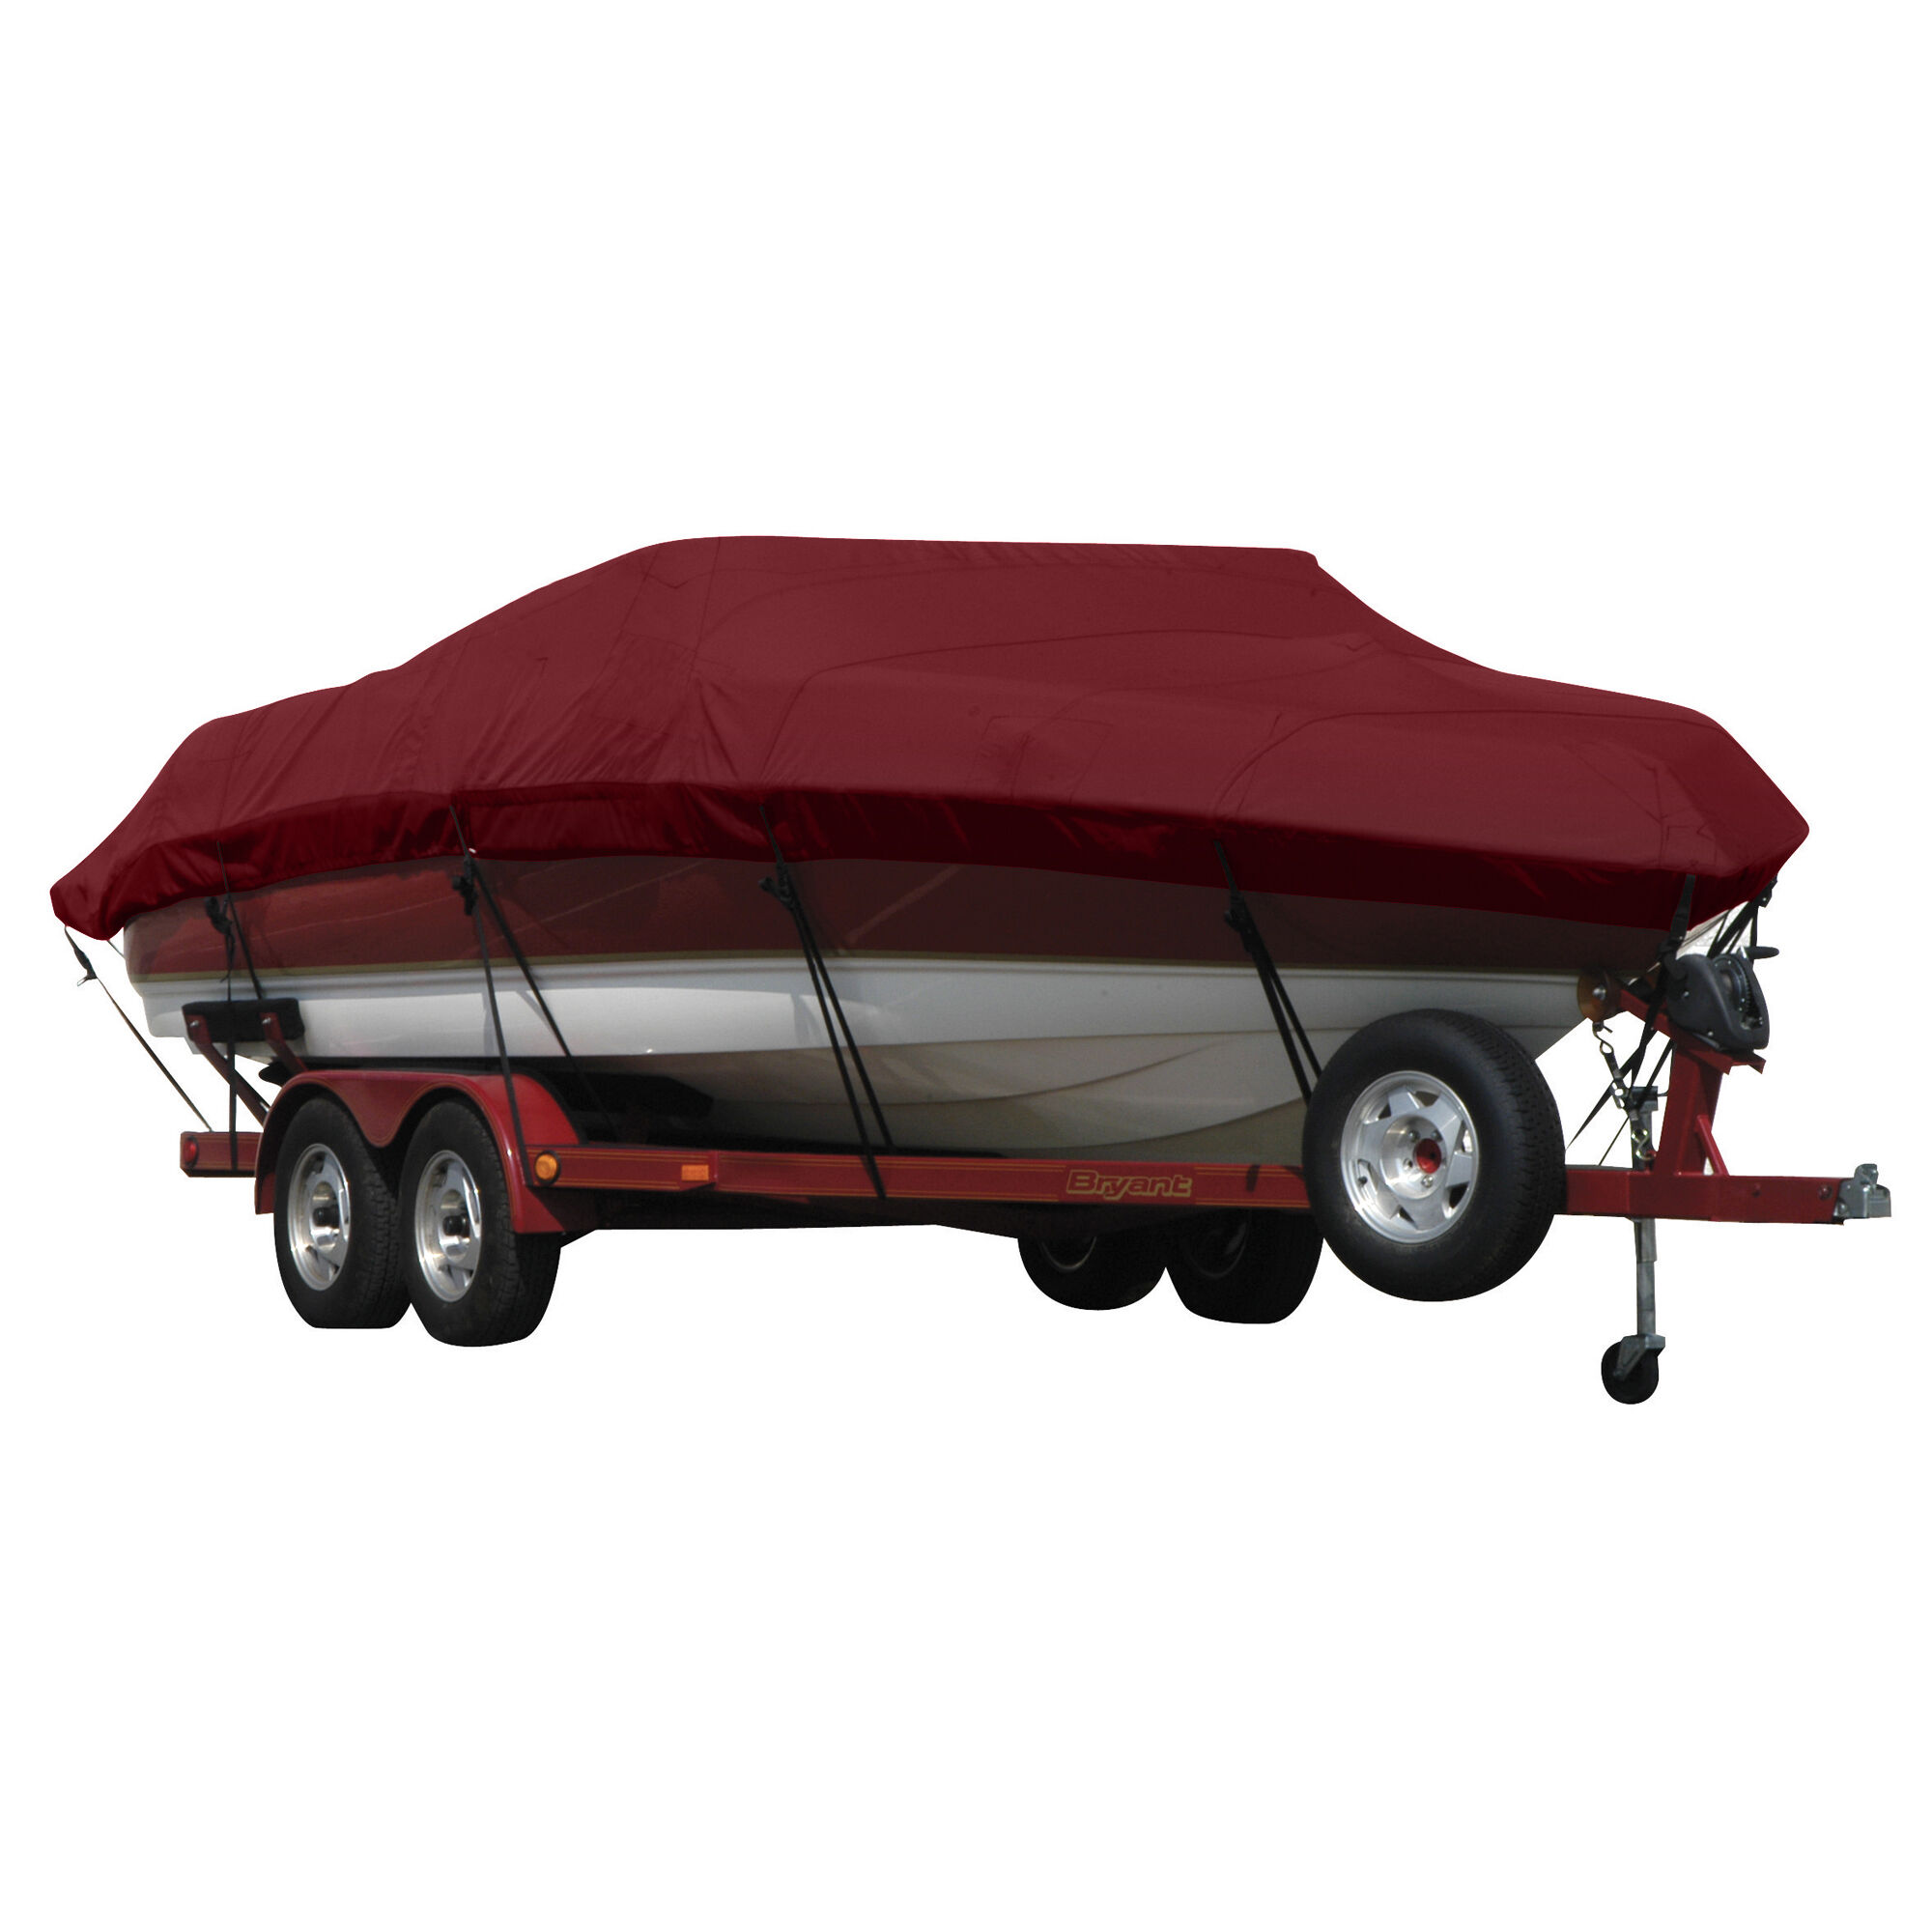 Covermate Exact Fit Sunbrella Boat Cover for Cobalt 232 232 Bowrider No Spot Light With Port Side Ladder I/O. Burgundy